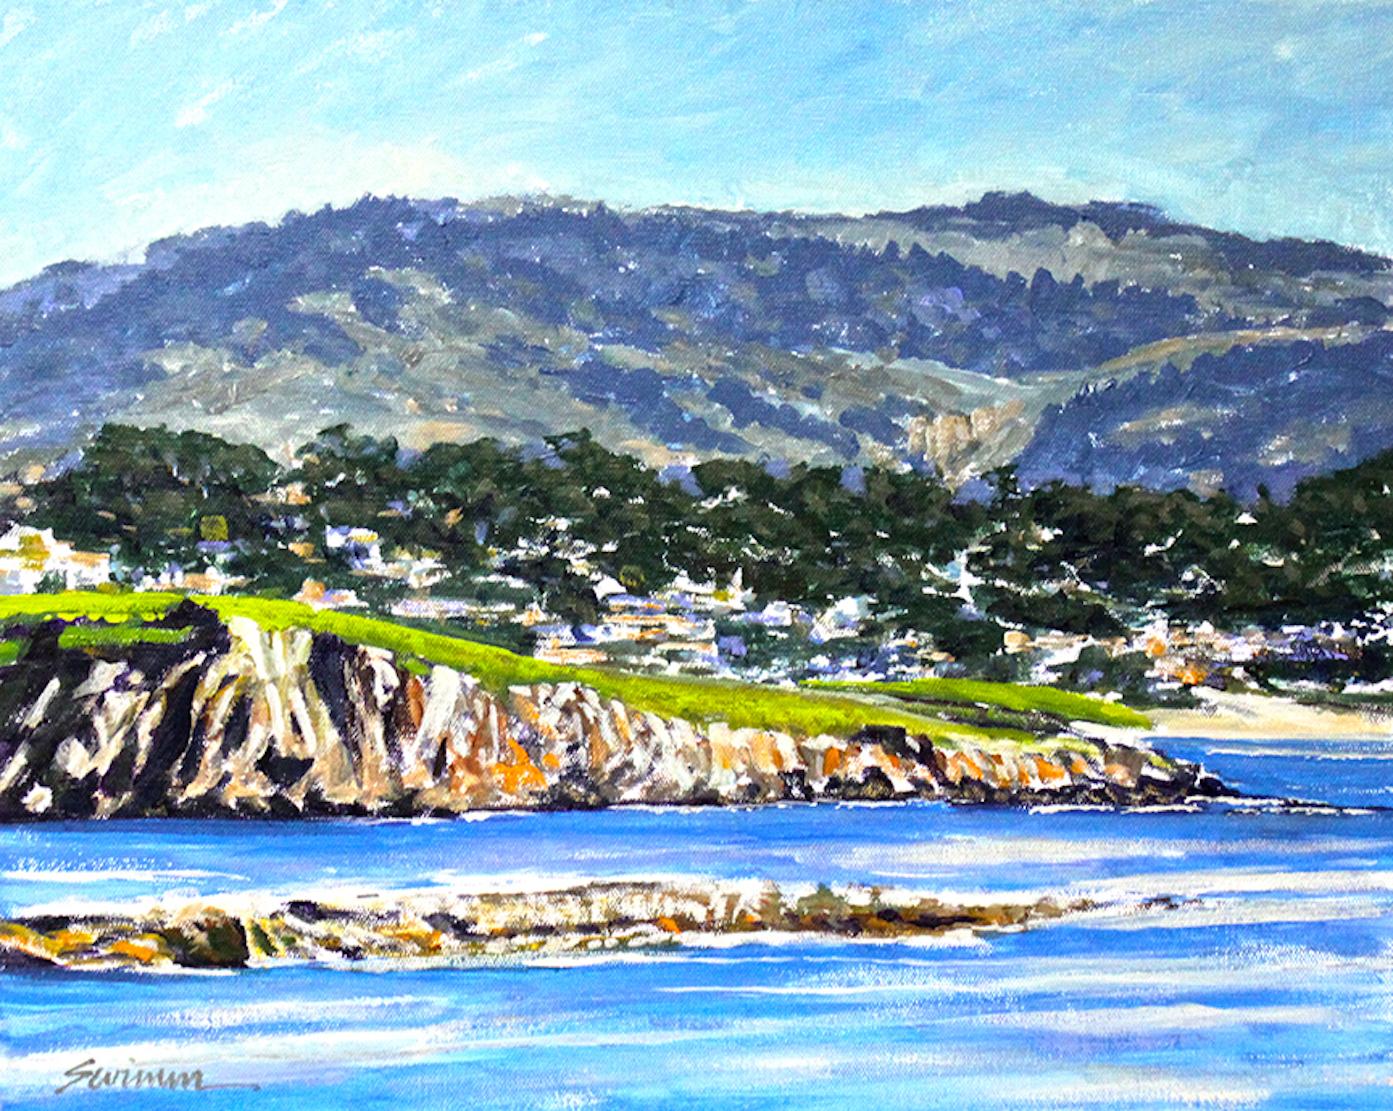 Tom Swimm Landscape Painting - "Pebble Beach Panorama" View from the Pacific